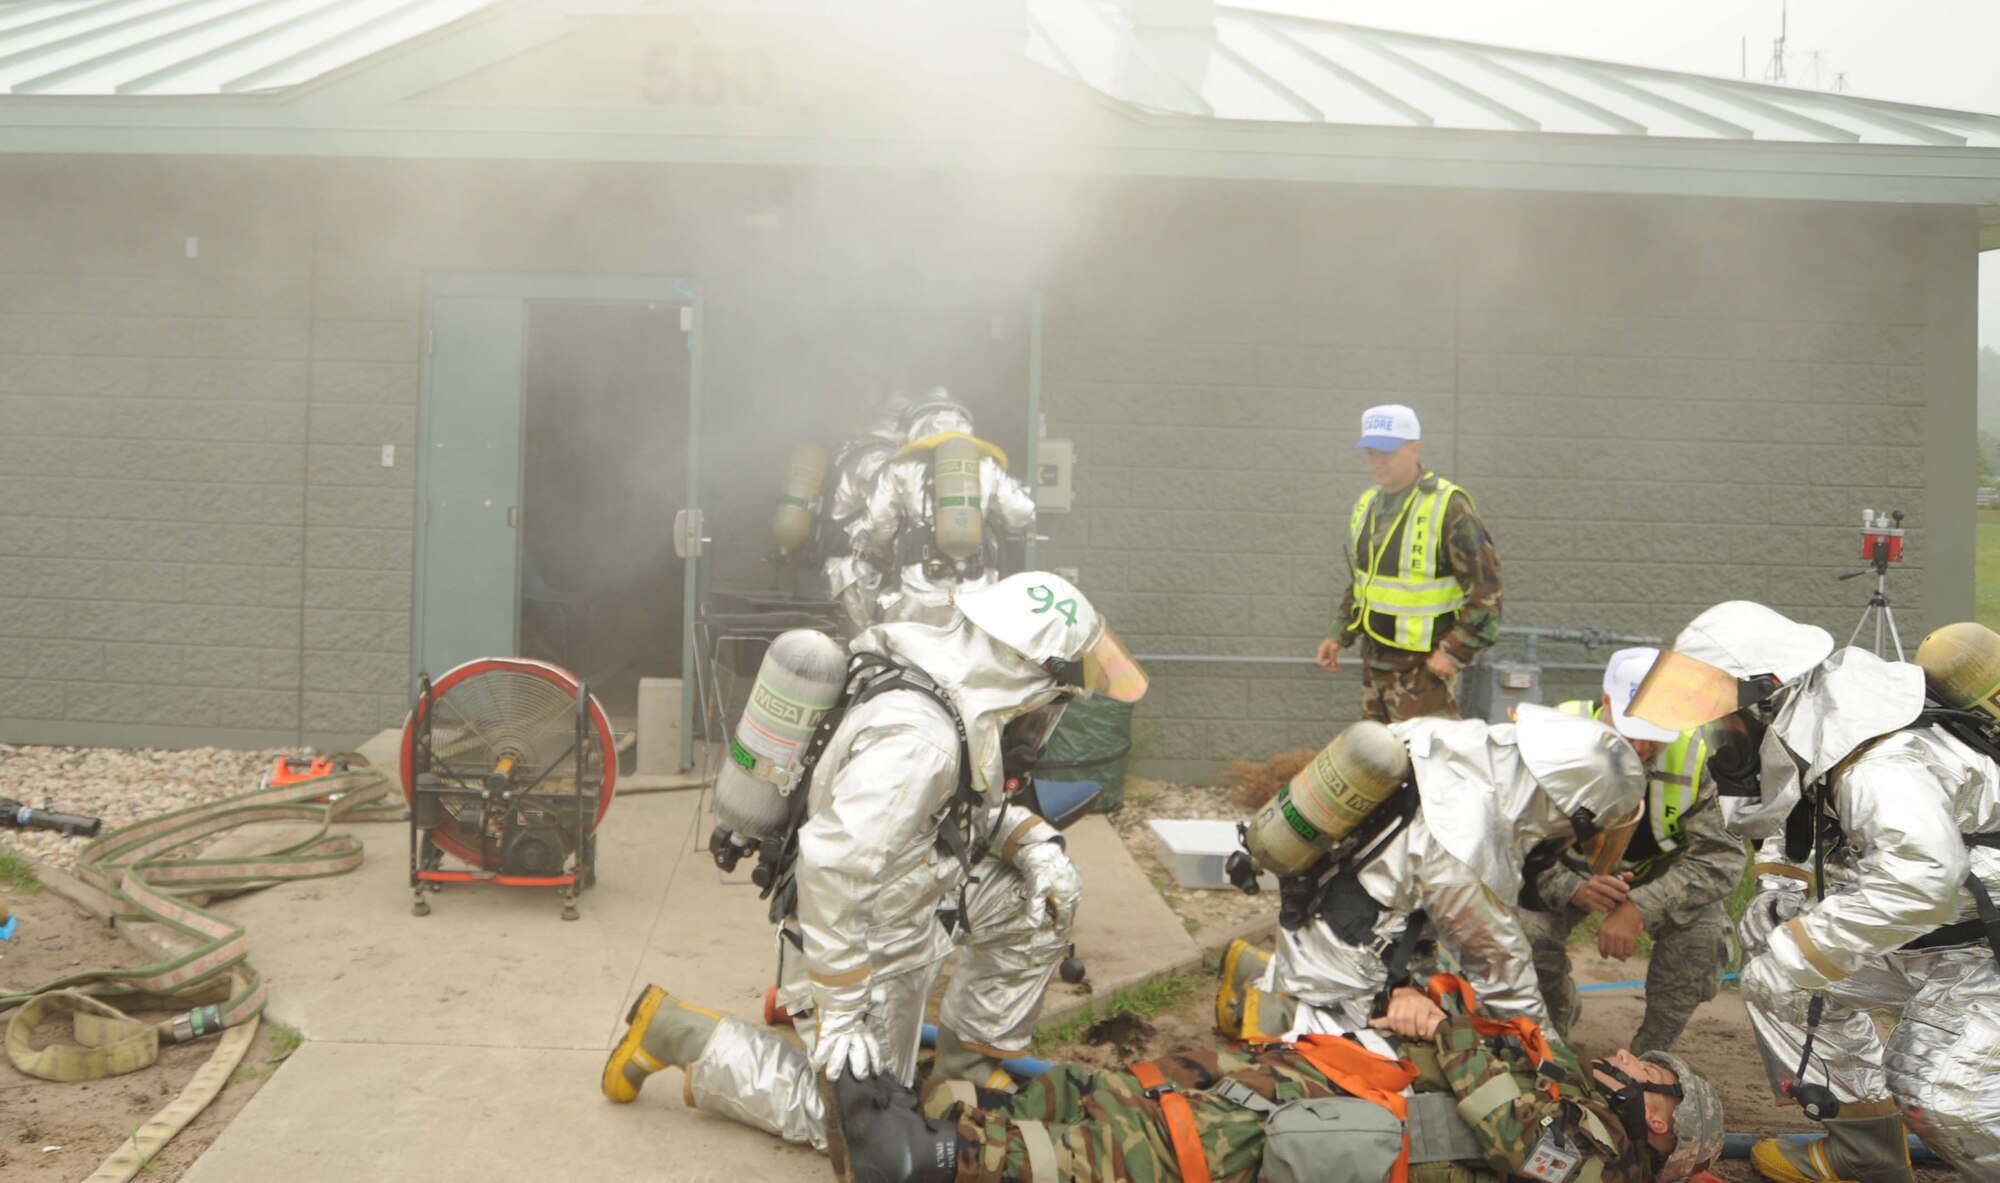 As smoke bellowed out the the command center, firefighters cleared the building of injured Airmen. The realistic scene was part of the "bugout" procedure for the ECT and command staff. Once the building was cleared, the firefighters started ventilating the rooms. It was later  discovered  faulty wiring in the air conditioner caused the smoke and subsequent evacuation. (Air Force photo by Jerry Green)